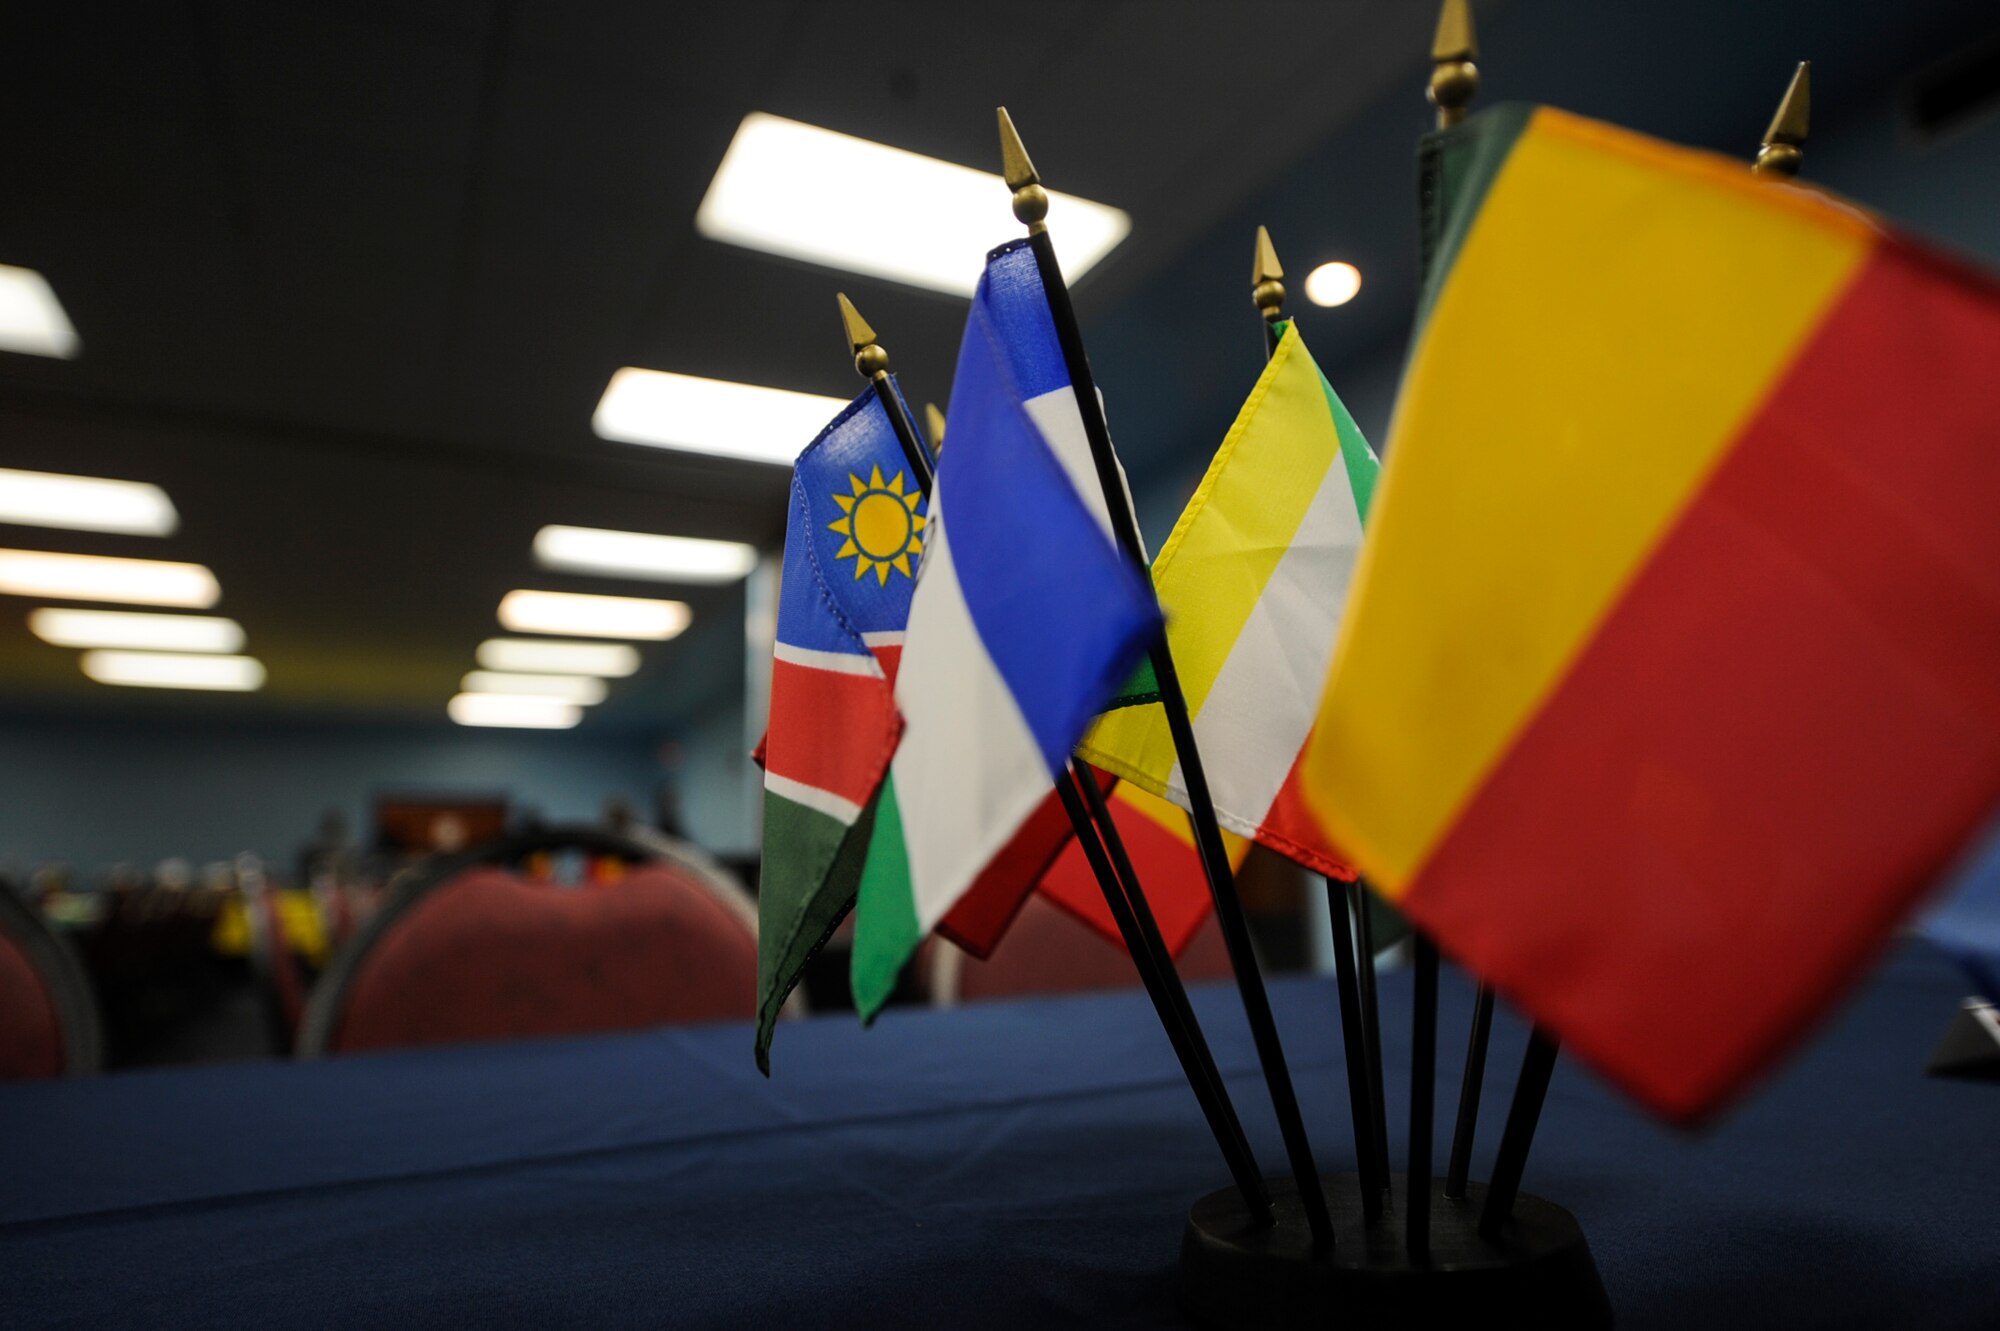 A centerpiece displaying flags from African countries rests on a table before the Black History Month luncheon Feb. 27, 2015, at Moody Air Force Base, Ga. Black History Month provides the opportunity for all to reflect on the roles African-American have played throughout history. (U.S. Air Force photo by Senior Airman Olivia Bumpers/Released)